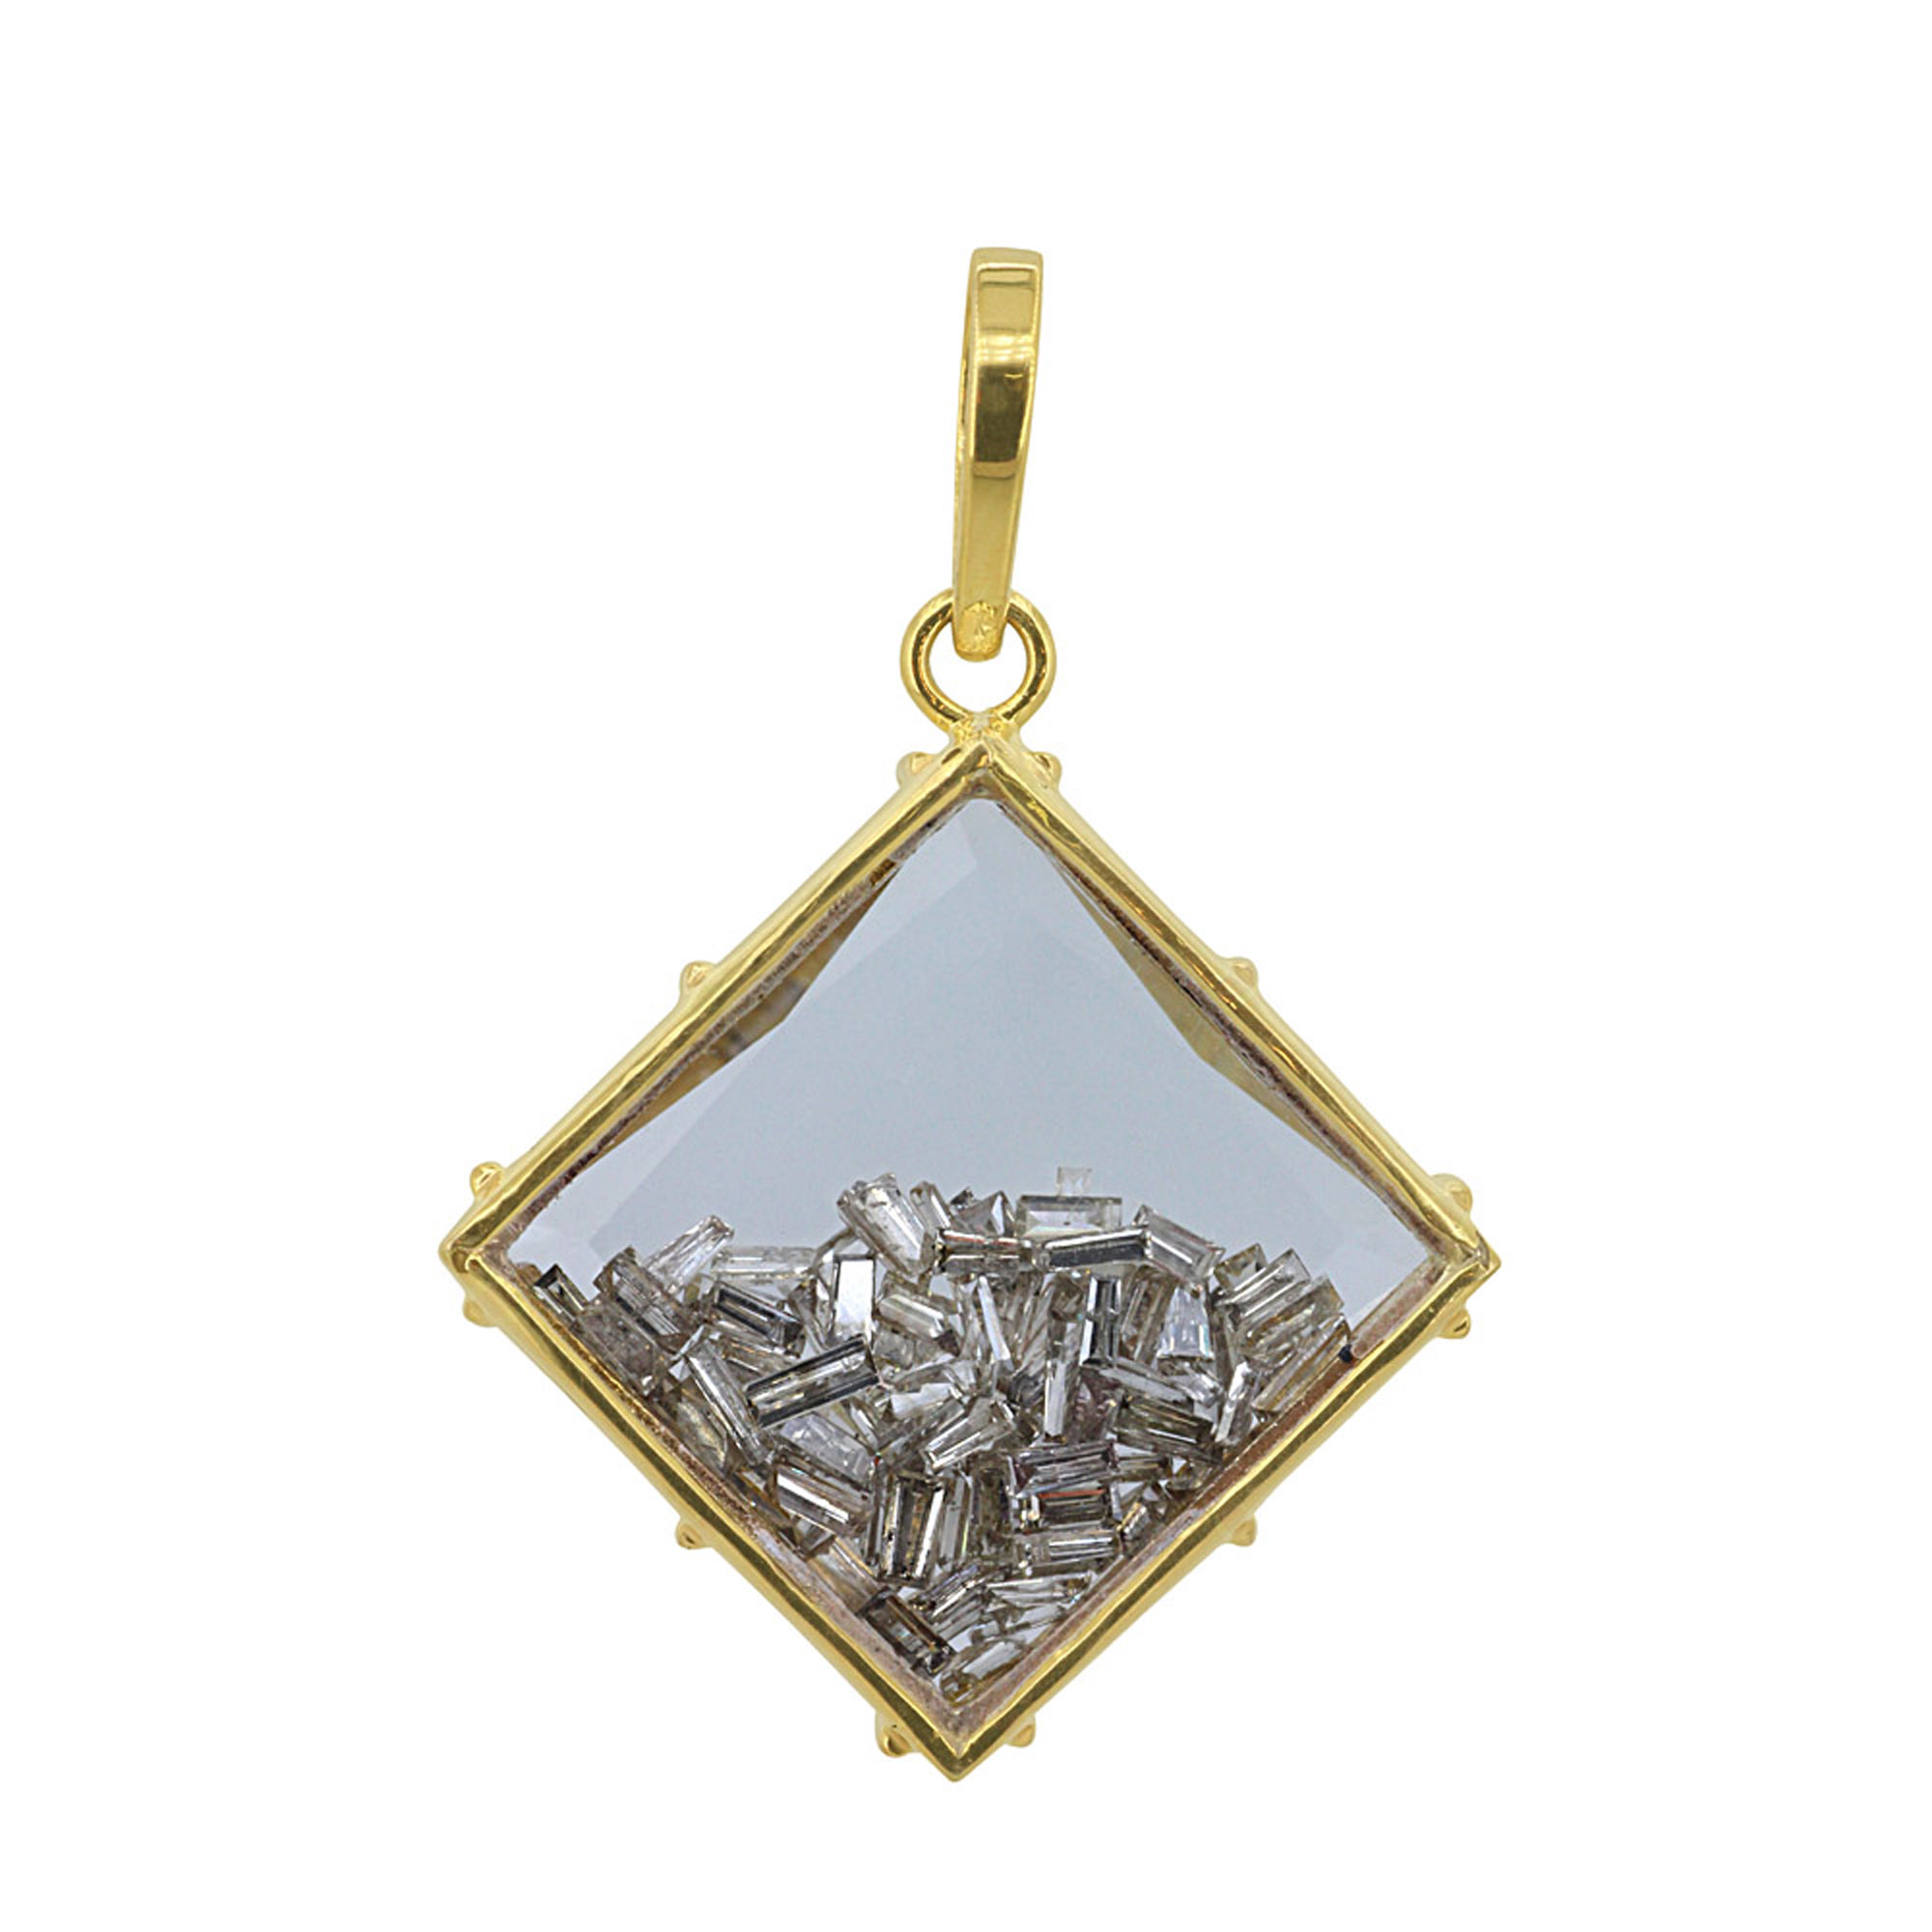 Gemstone crystal shaker pendant made in silver with real diamond